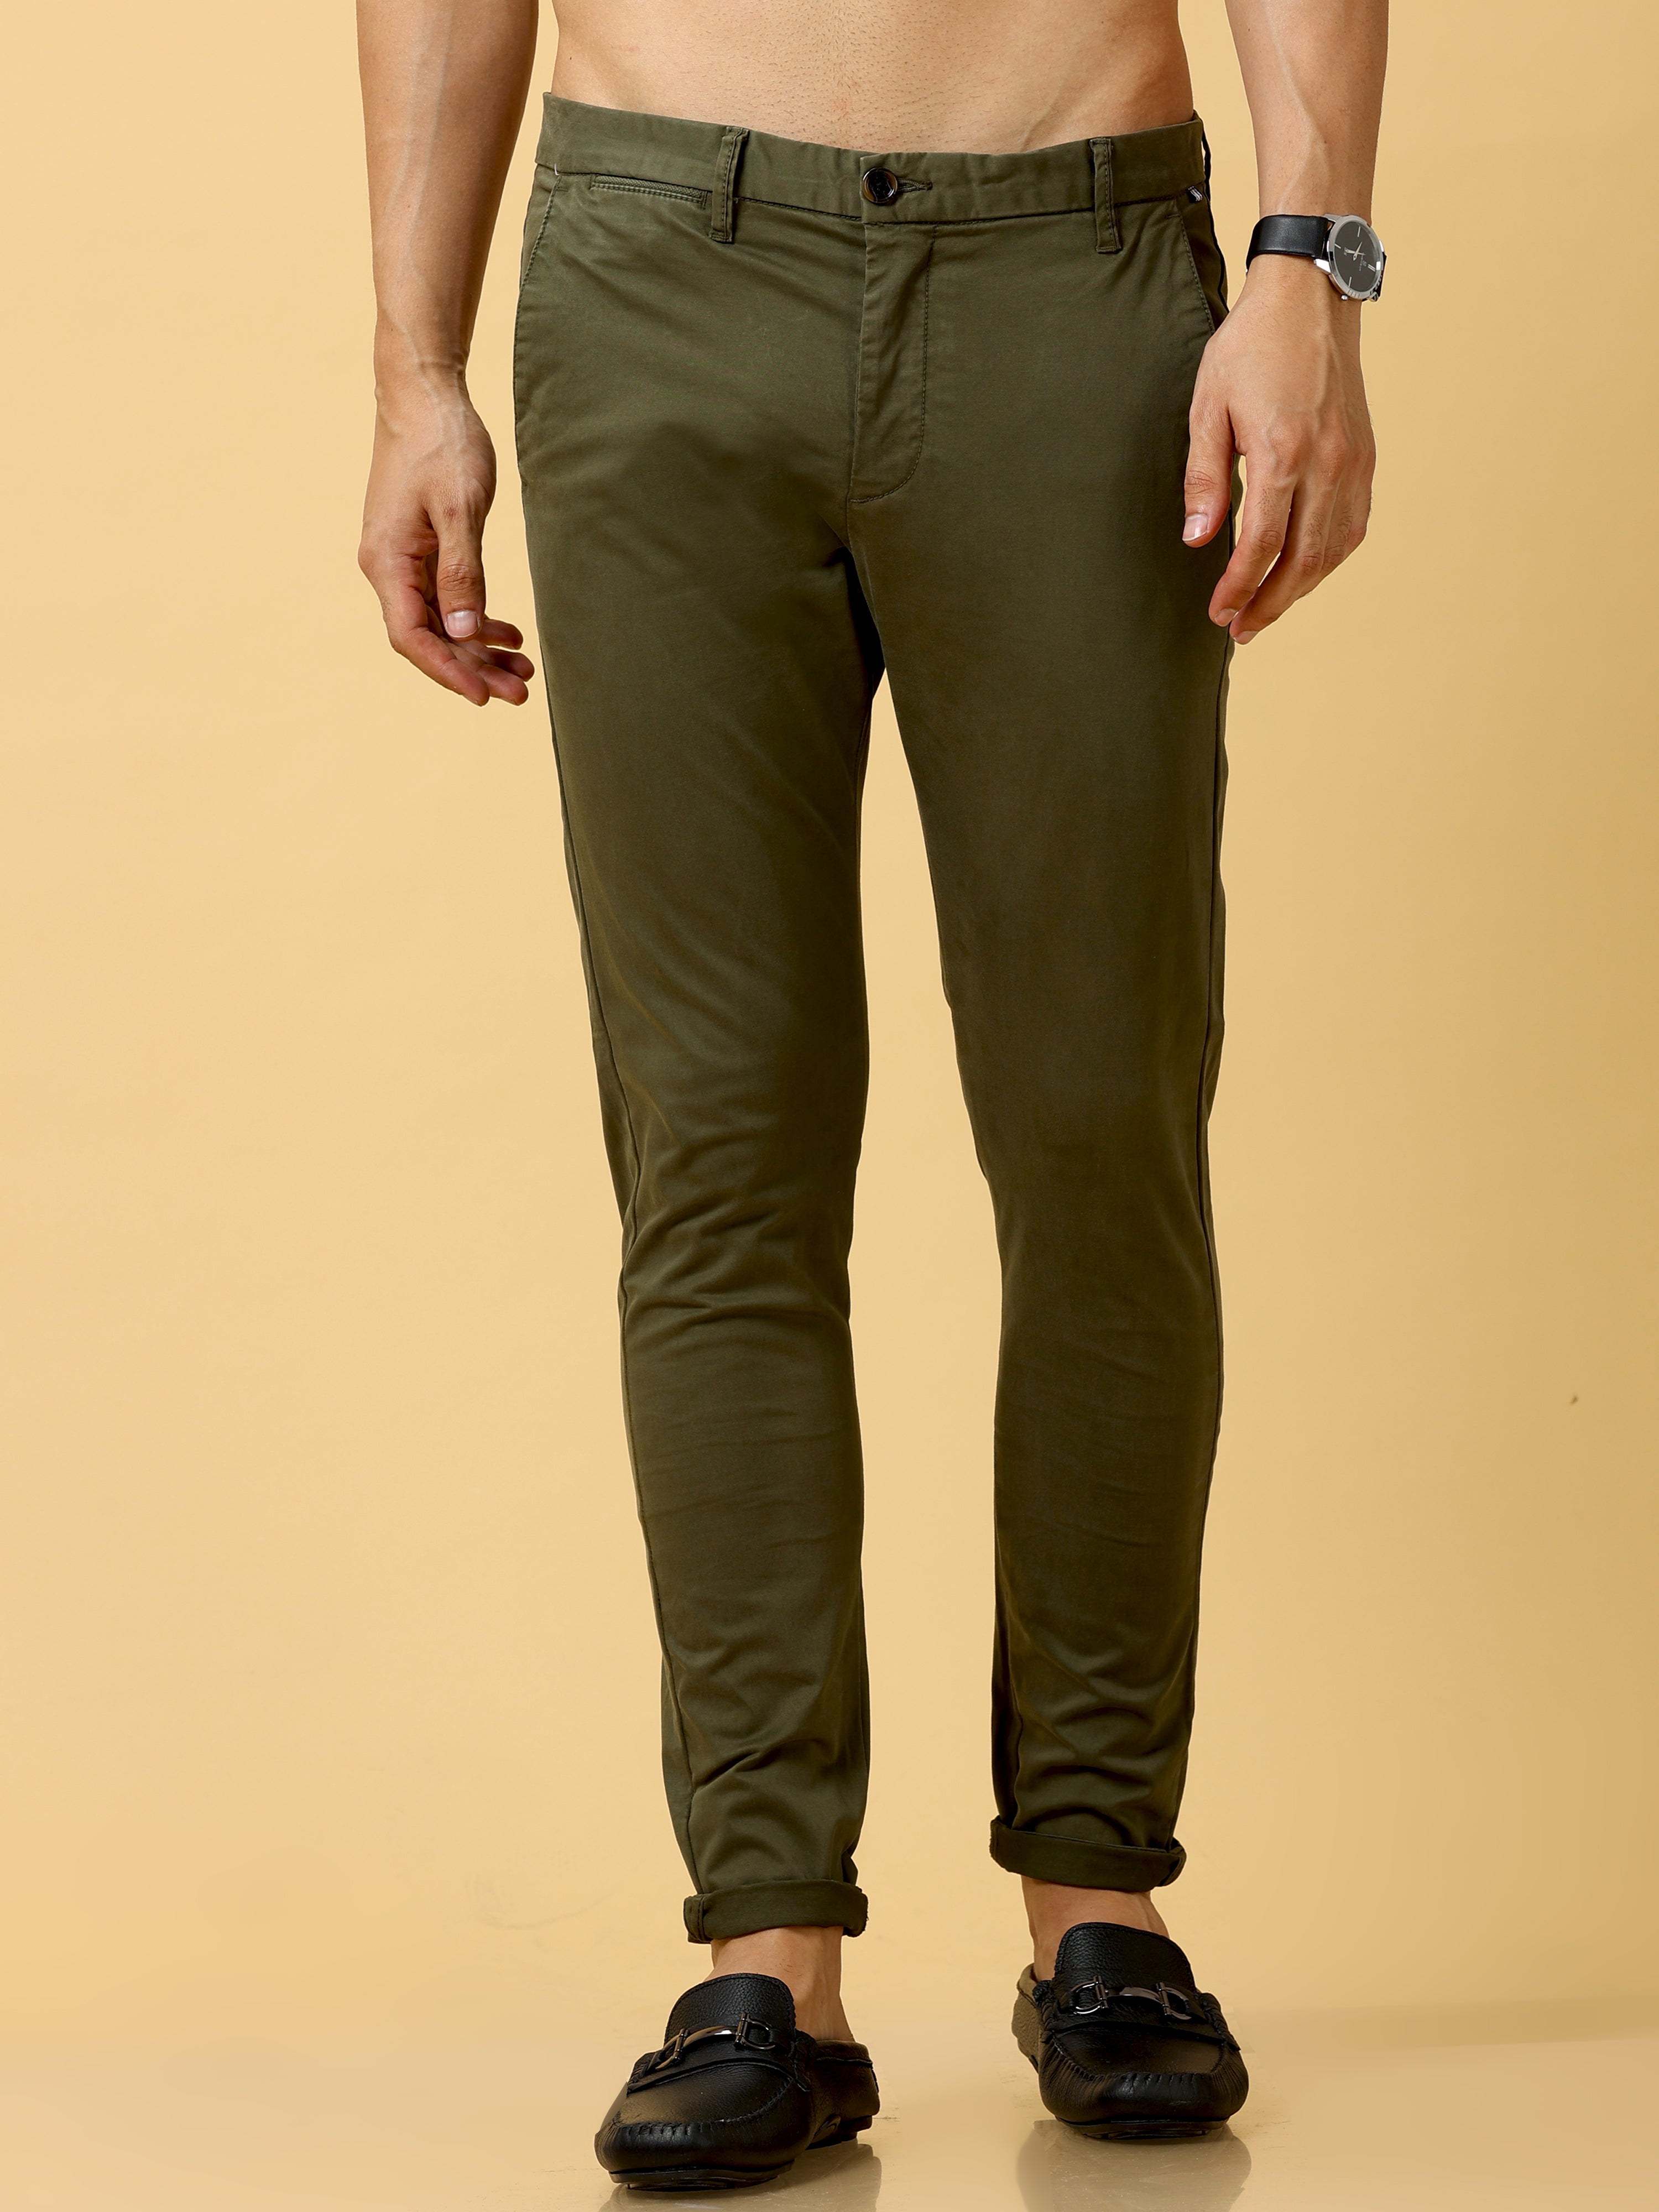 Casual Trousers For Men  Buy Men Trousers Joggers Online